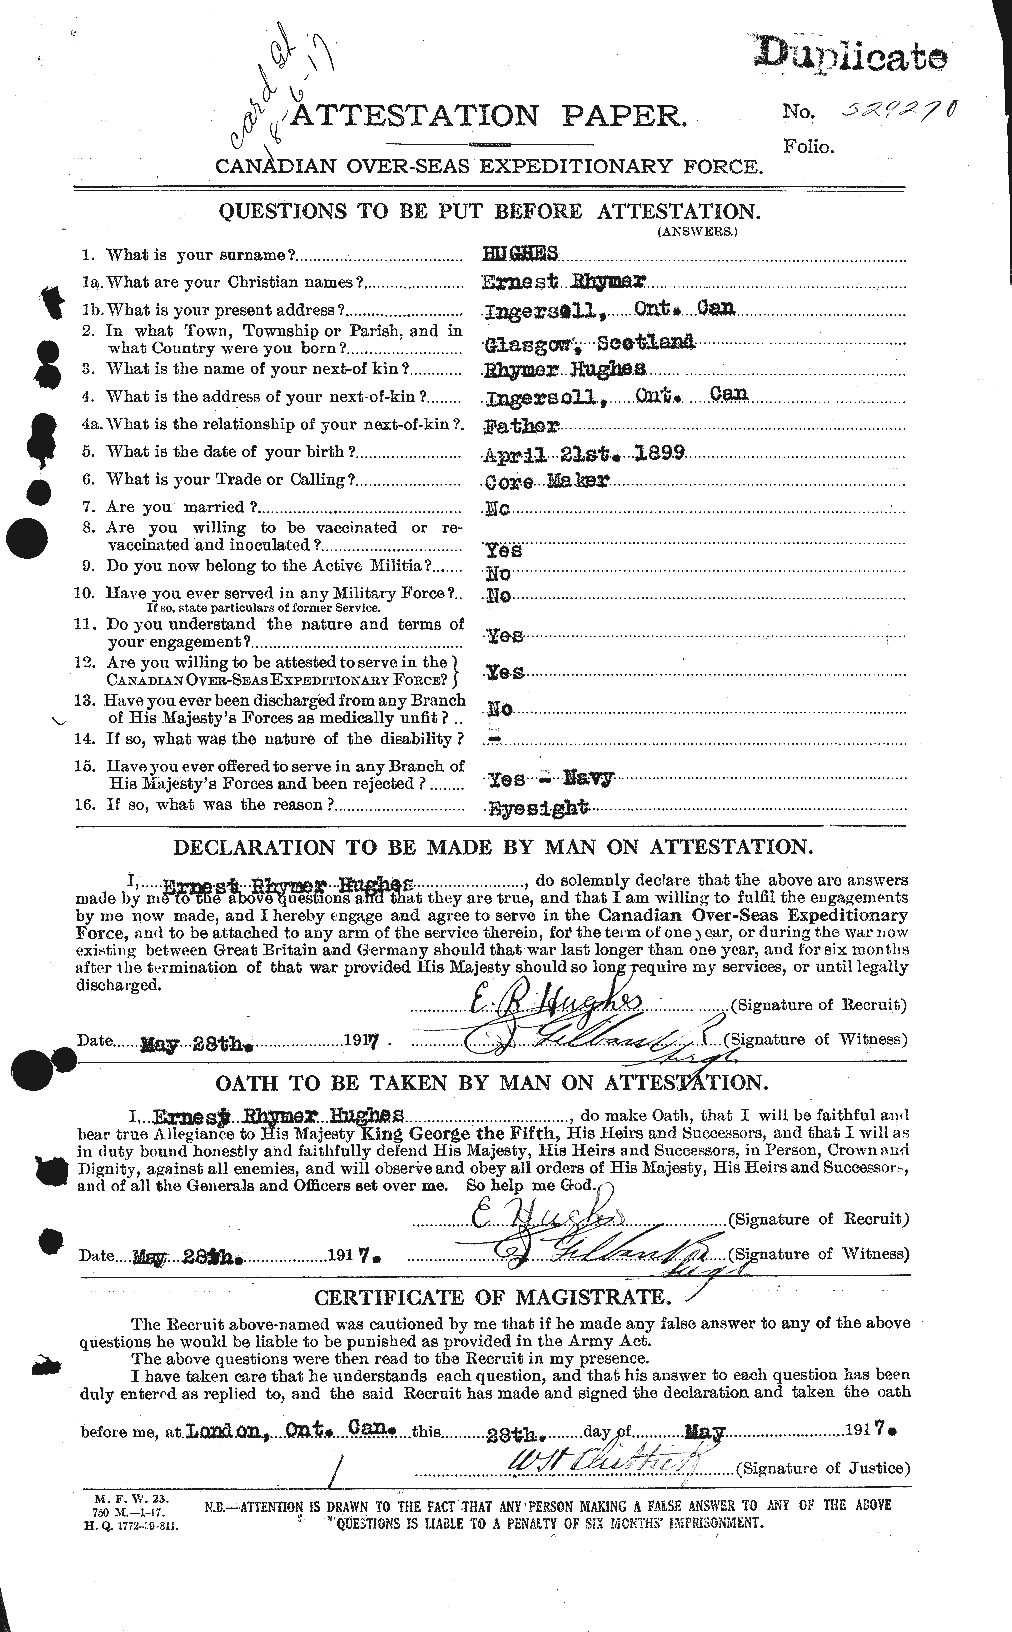 Personnel Records of the First World War - CEF 403755a